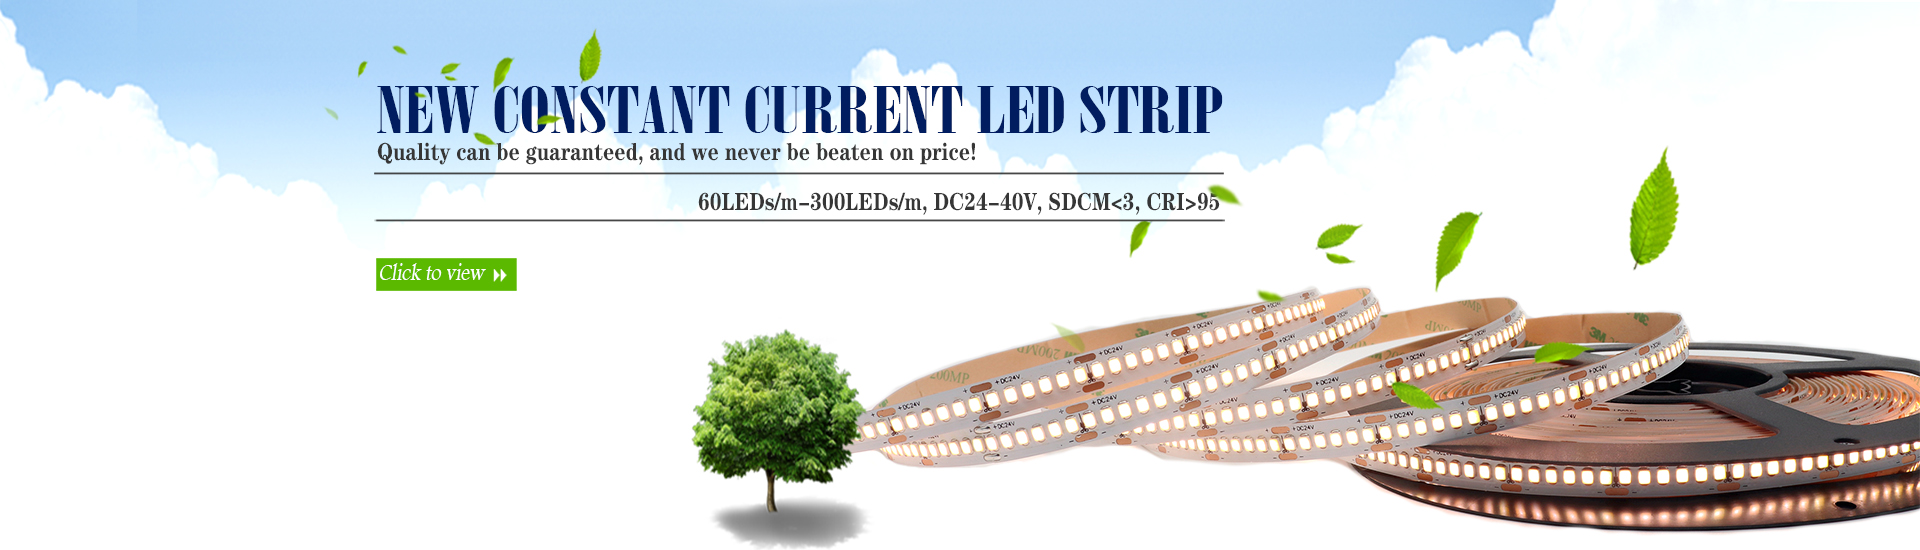 New constant current led strip